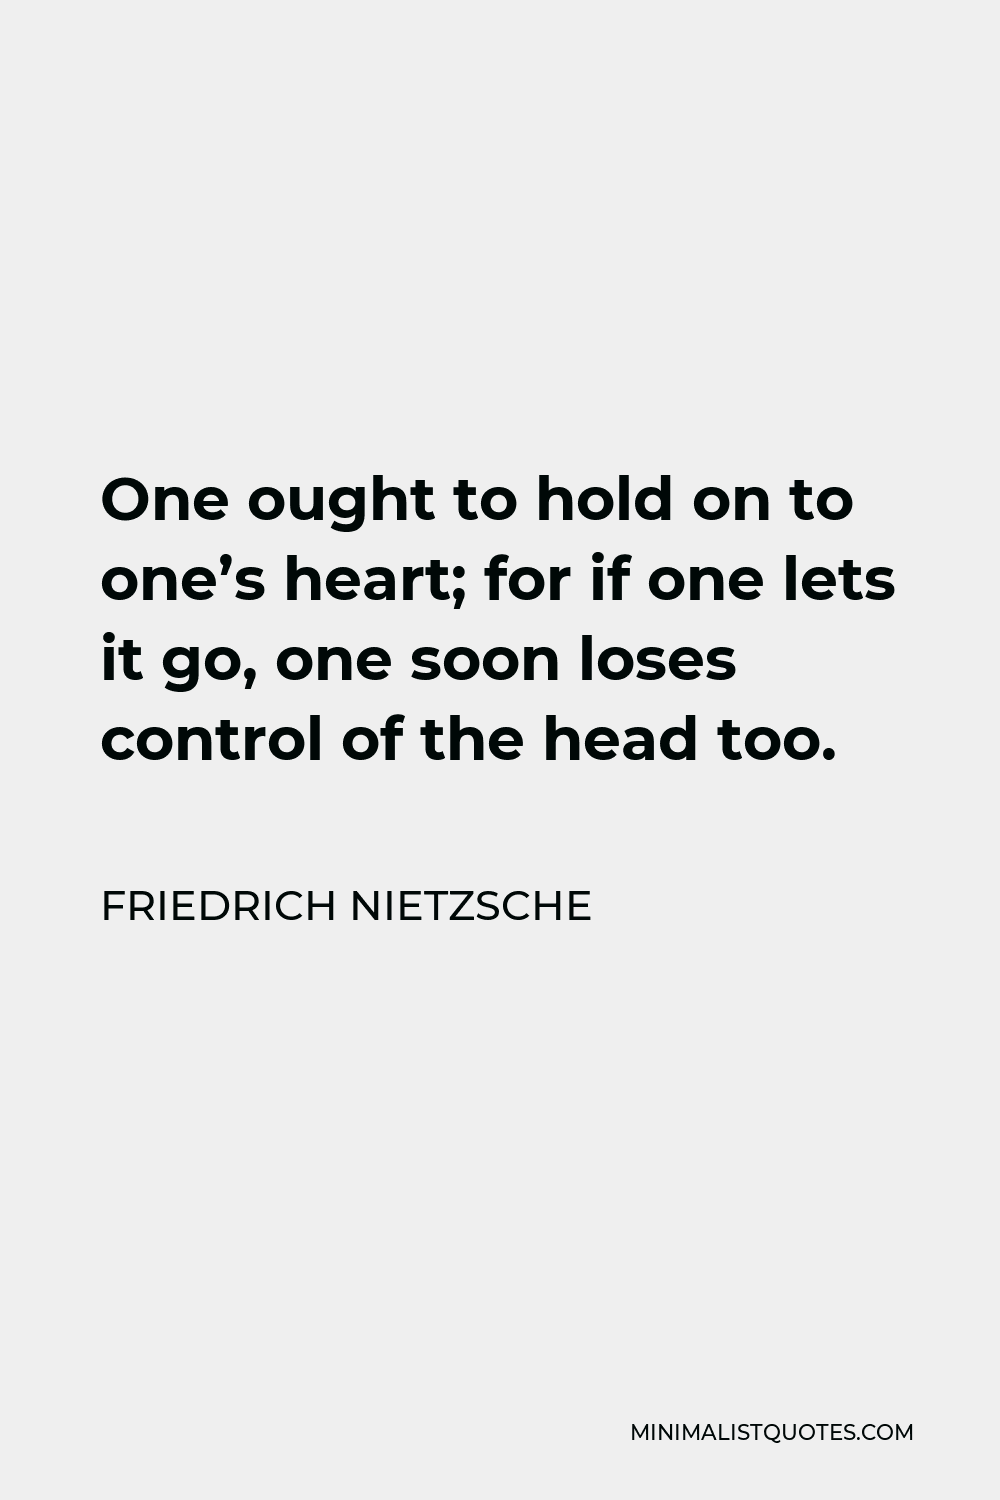 Friedrich Nietzsche Quote - One ought to hold on to one’s heart; for if one lets it go, one soon loses control of the head too.